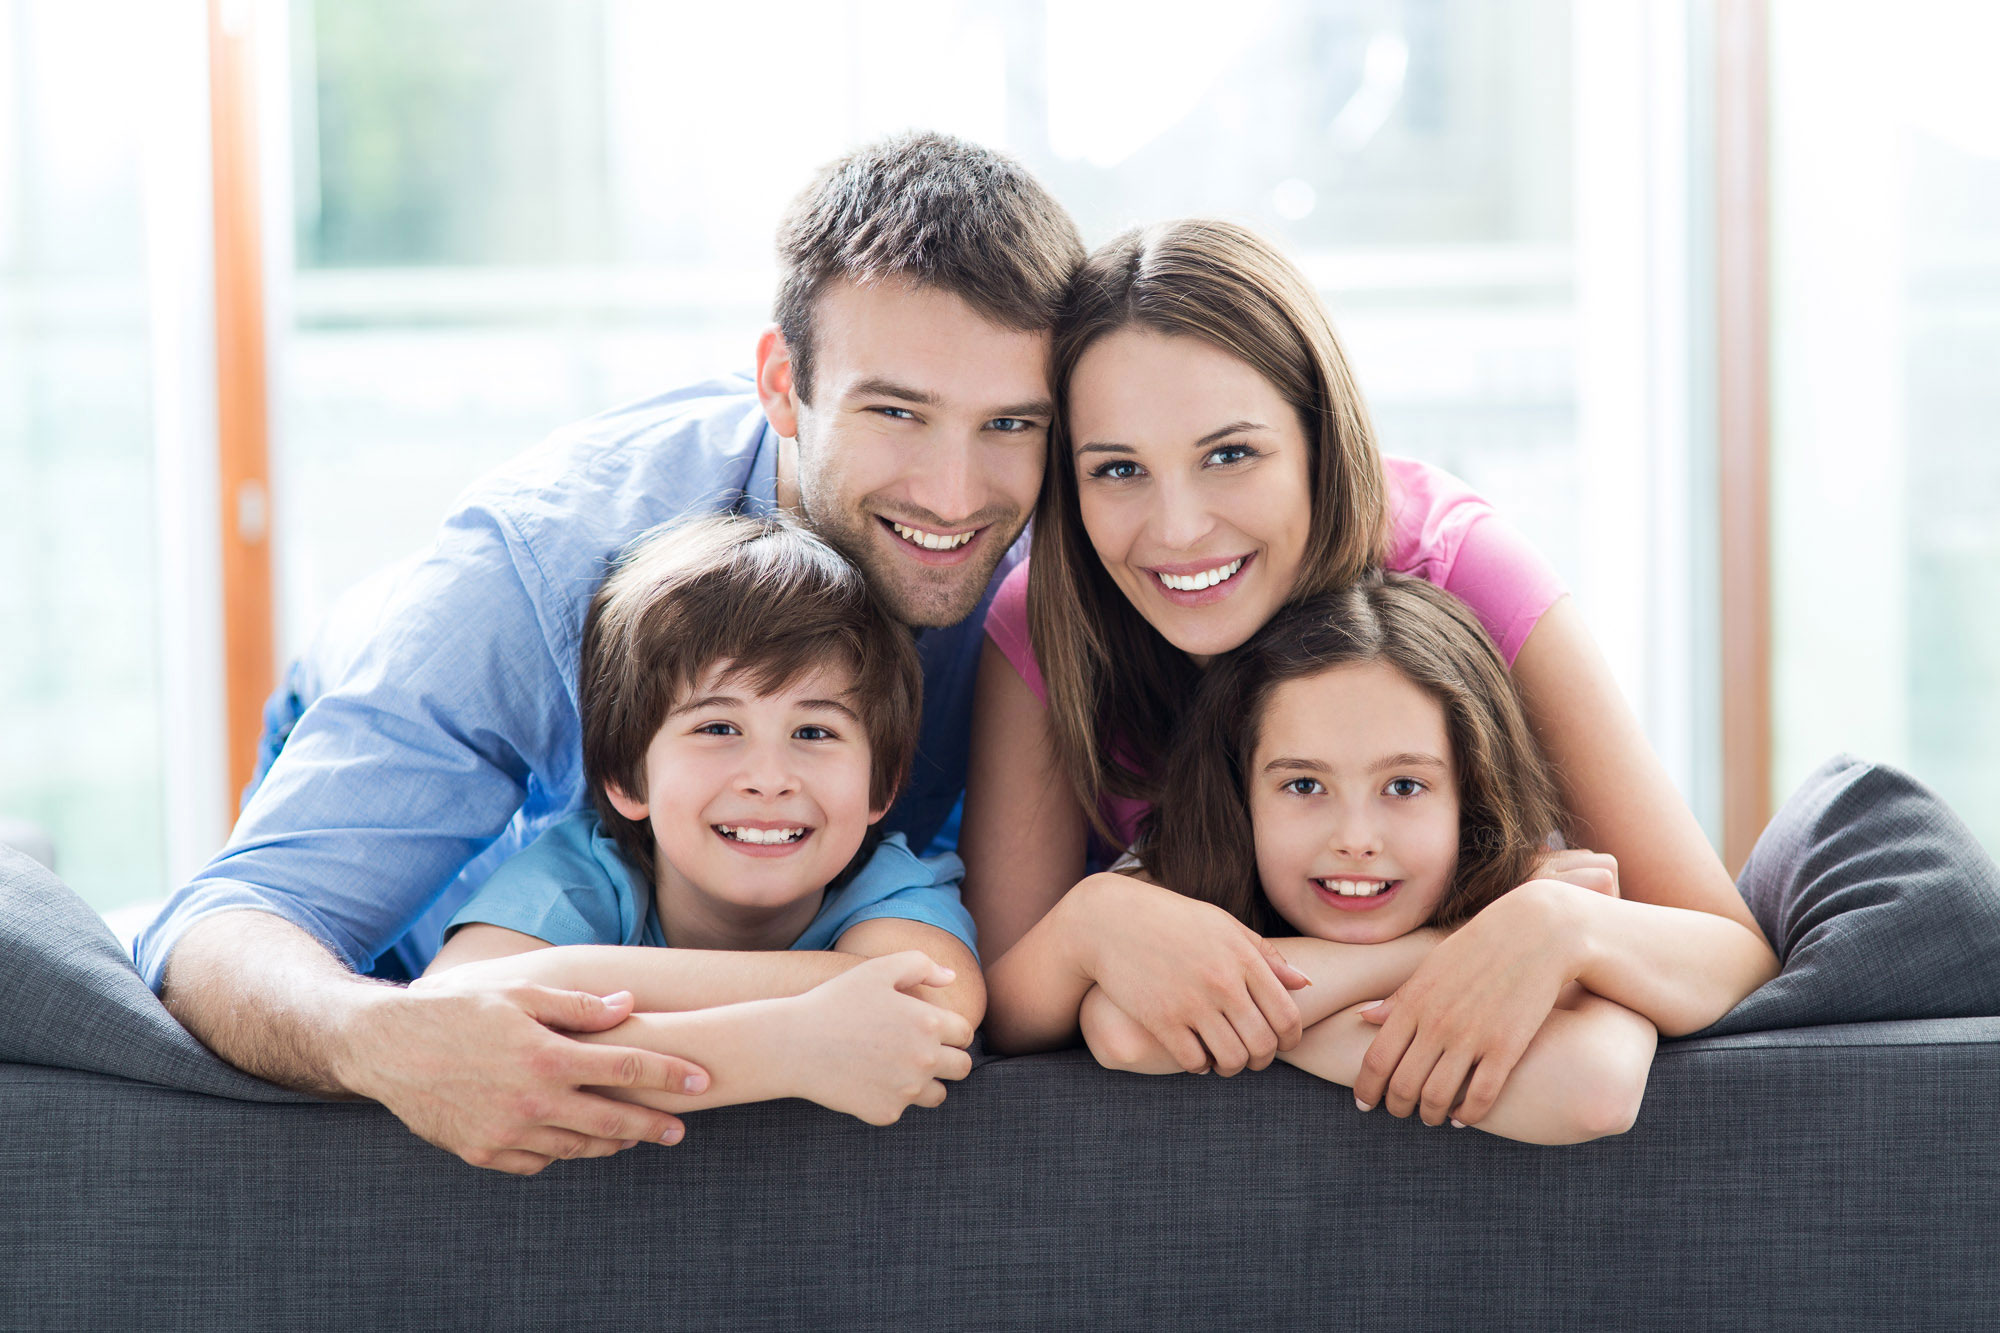 family on couch showing teeth smiling